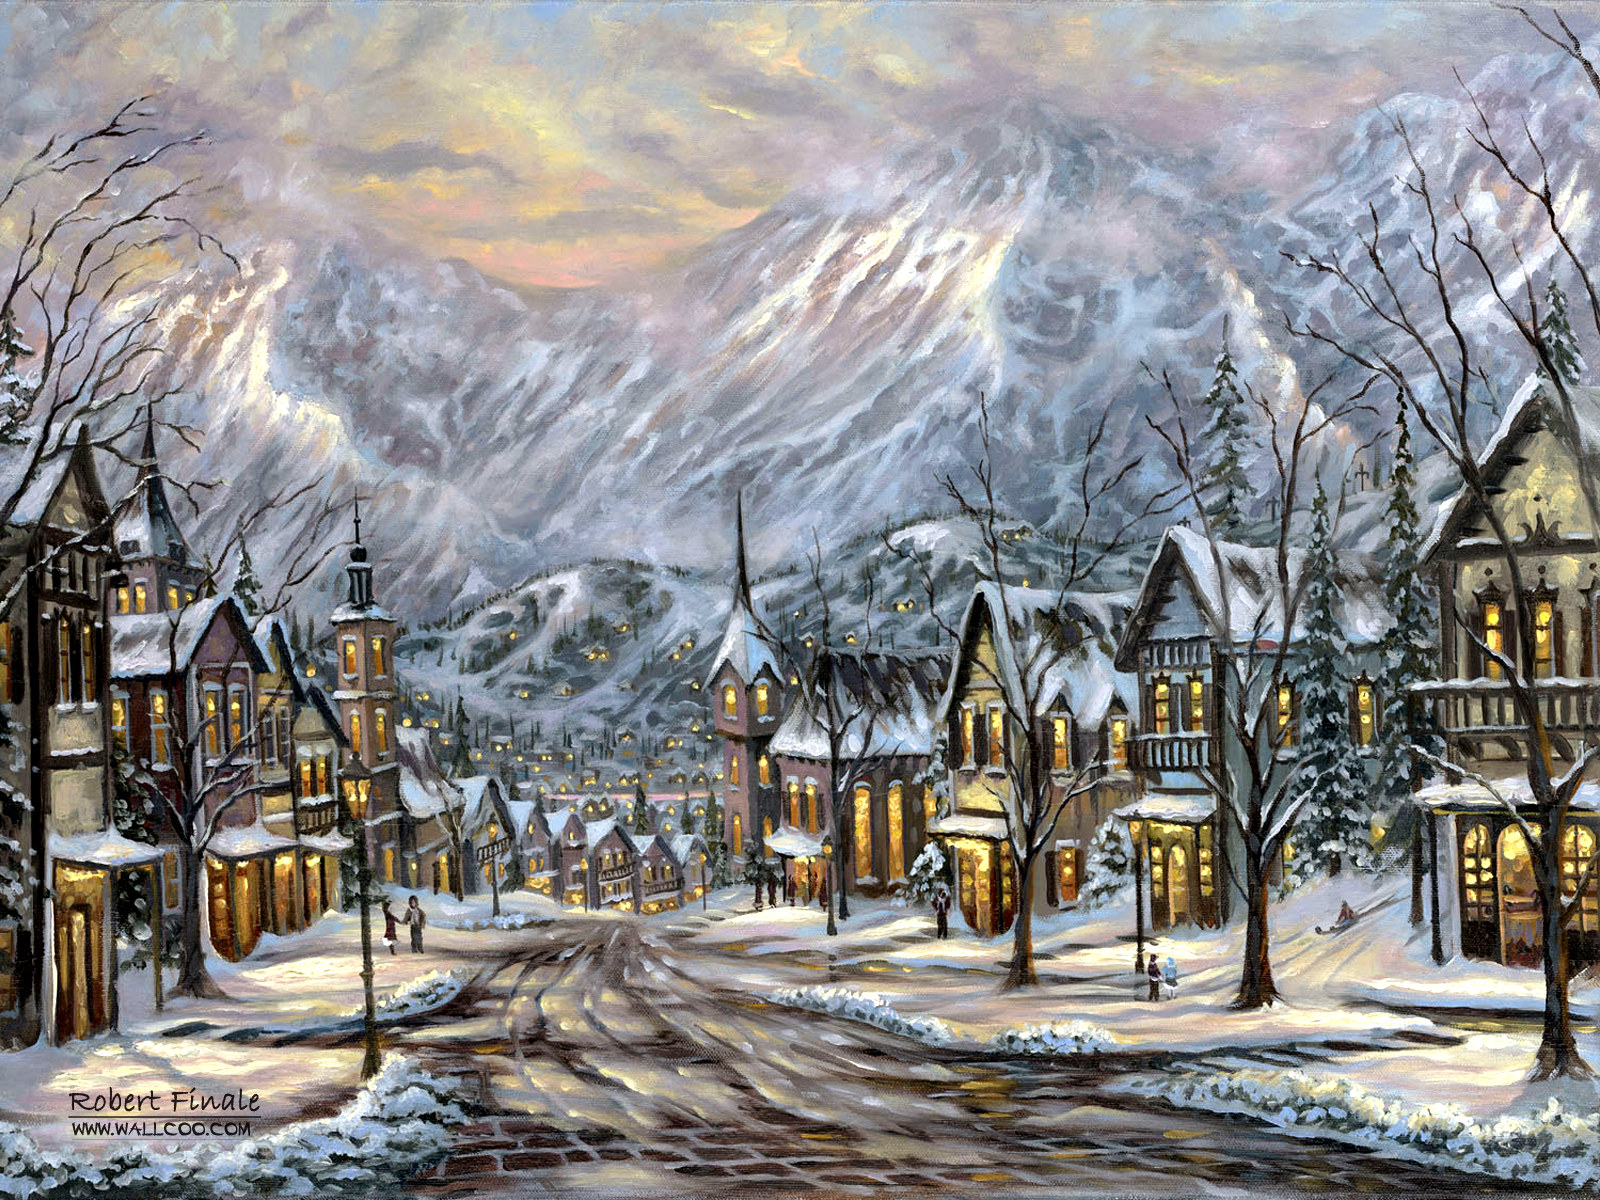 a snowy village with houses by a mountain